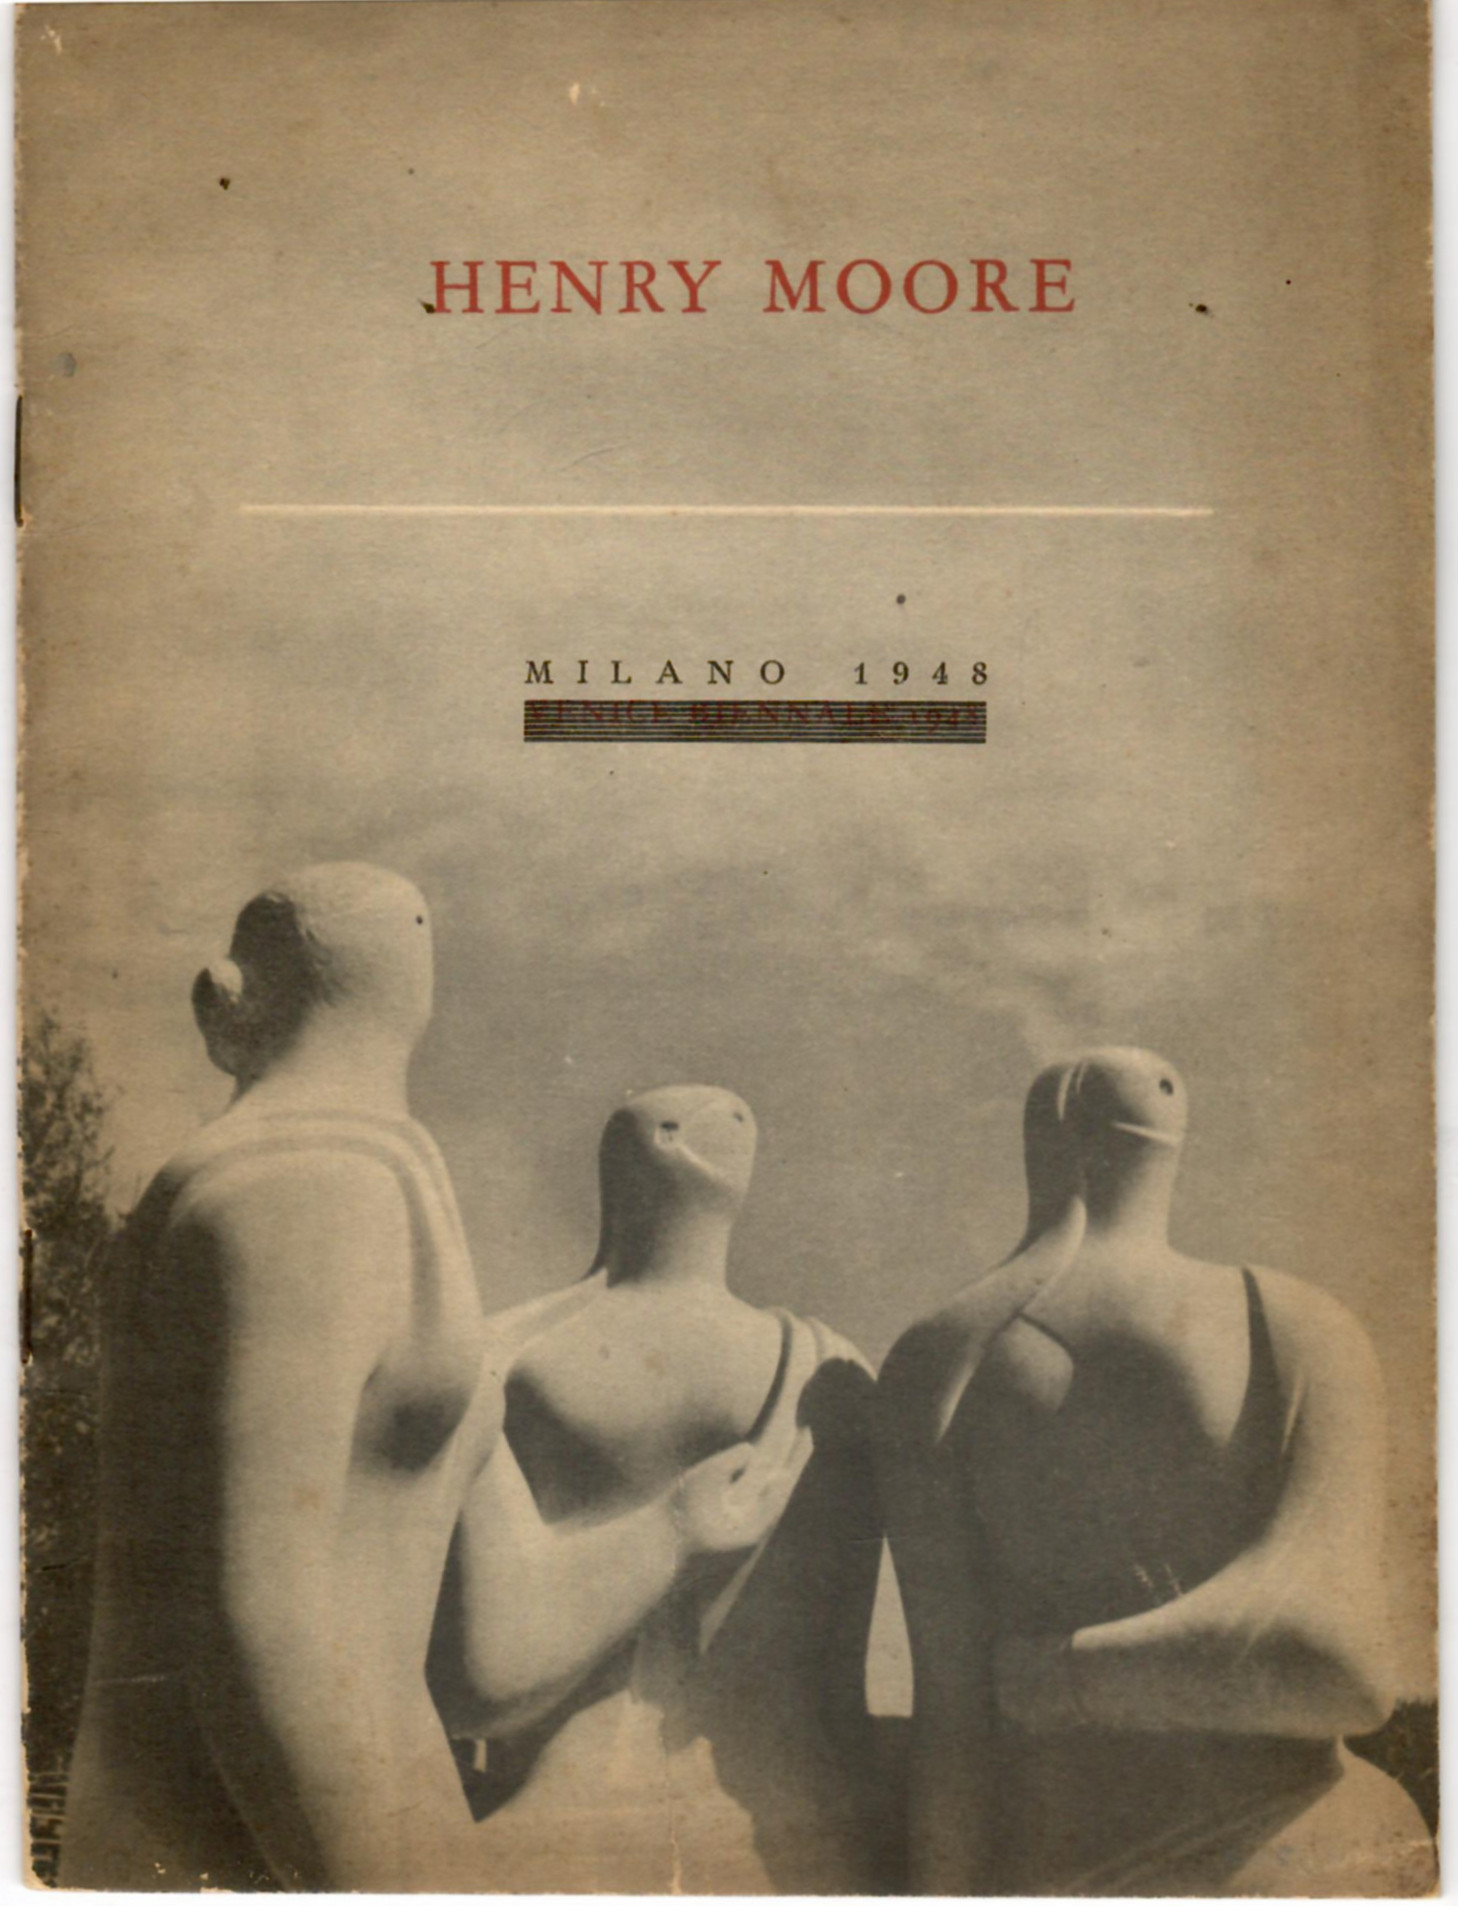 Sculpture and Drawings by Henry Moore. Venice Biennale 1948